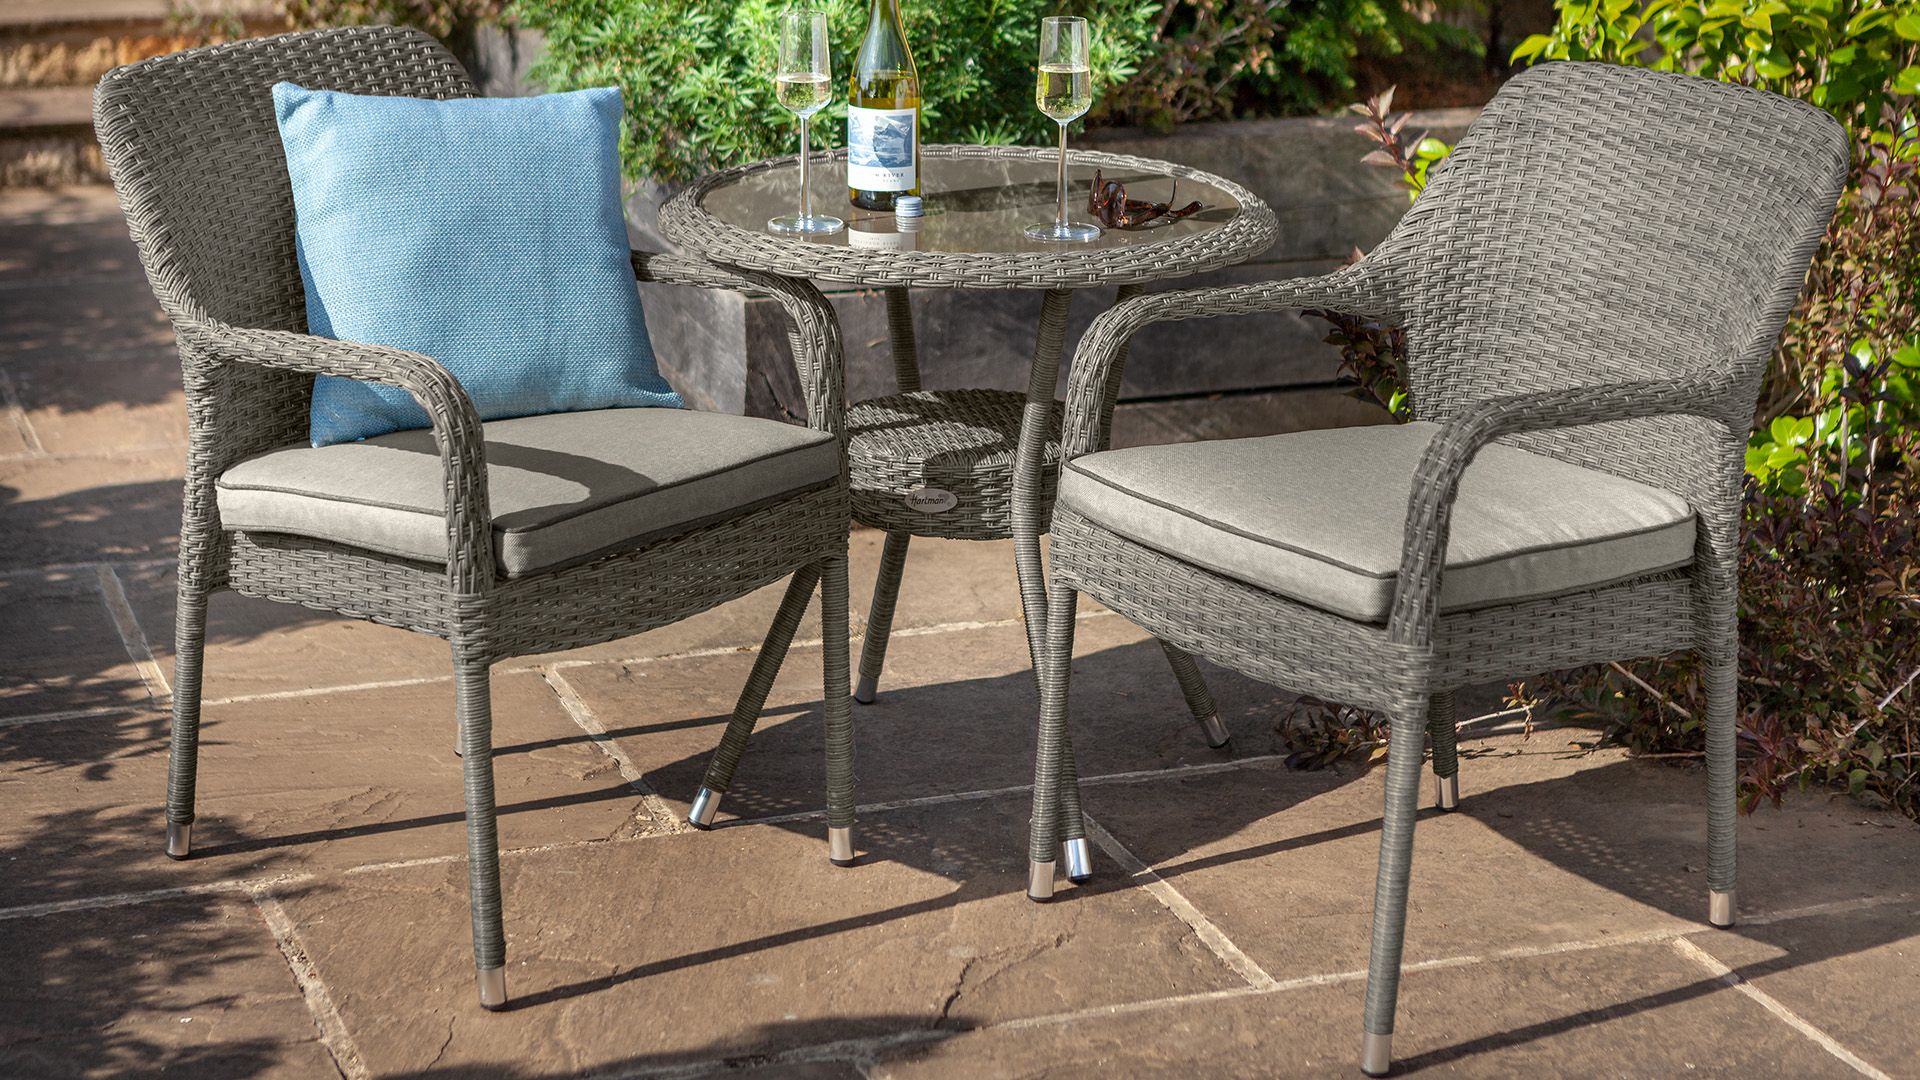 Savoy Stacking Bistro Set Grey – Savoy – Wicker Garden Furniture Pertaining To Gray Wash Wood Porch Patio Chairs Sets (View 3 of 15)